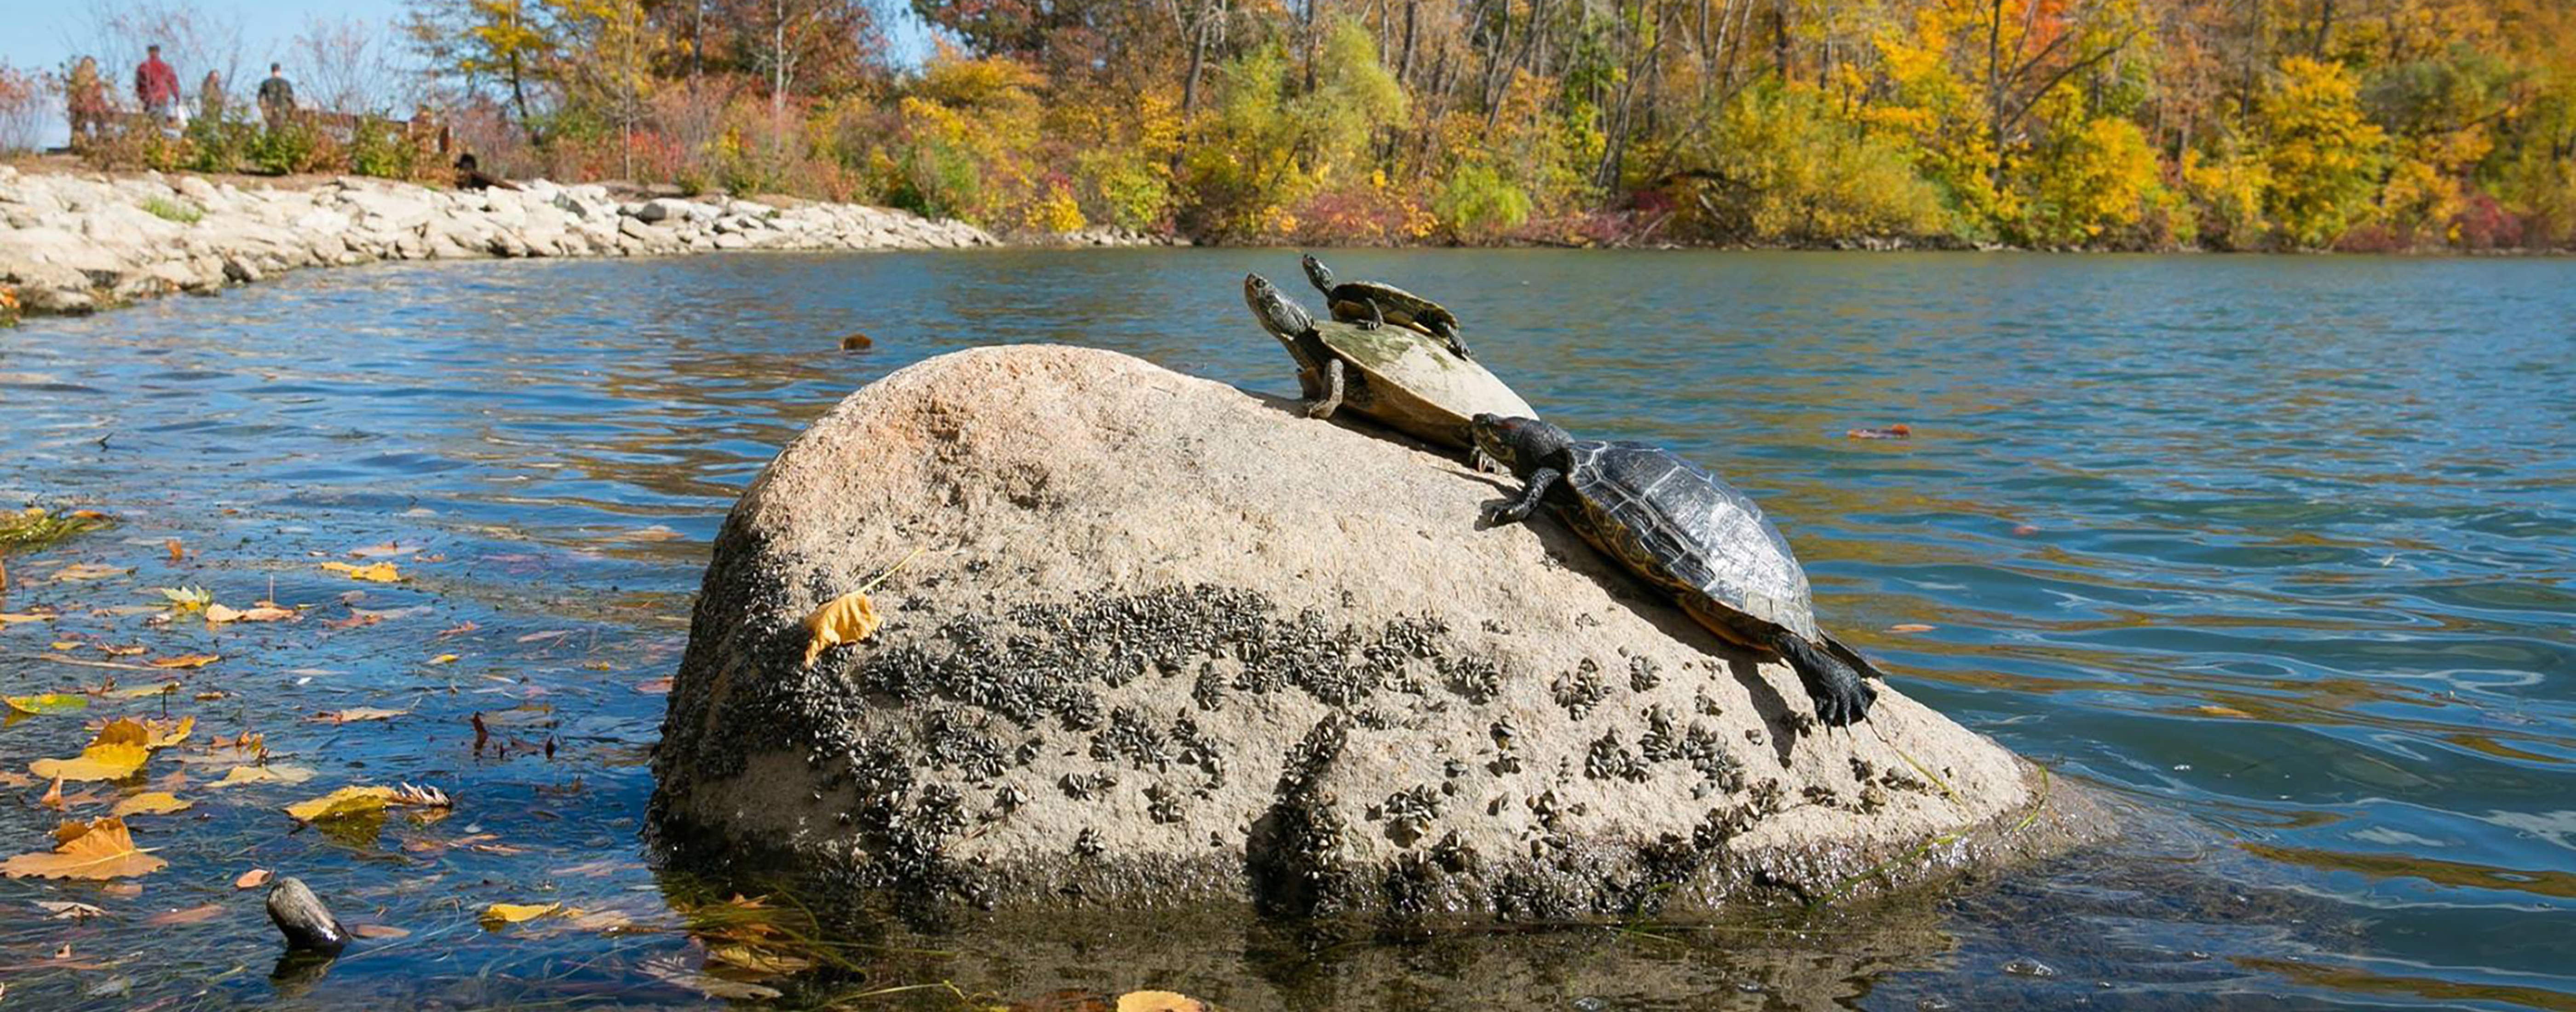 Several turtles climbing a rock in the water